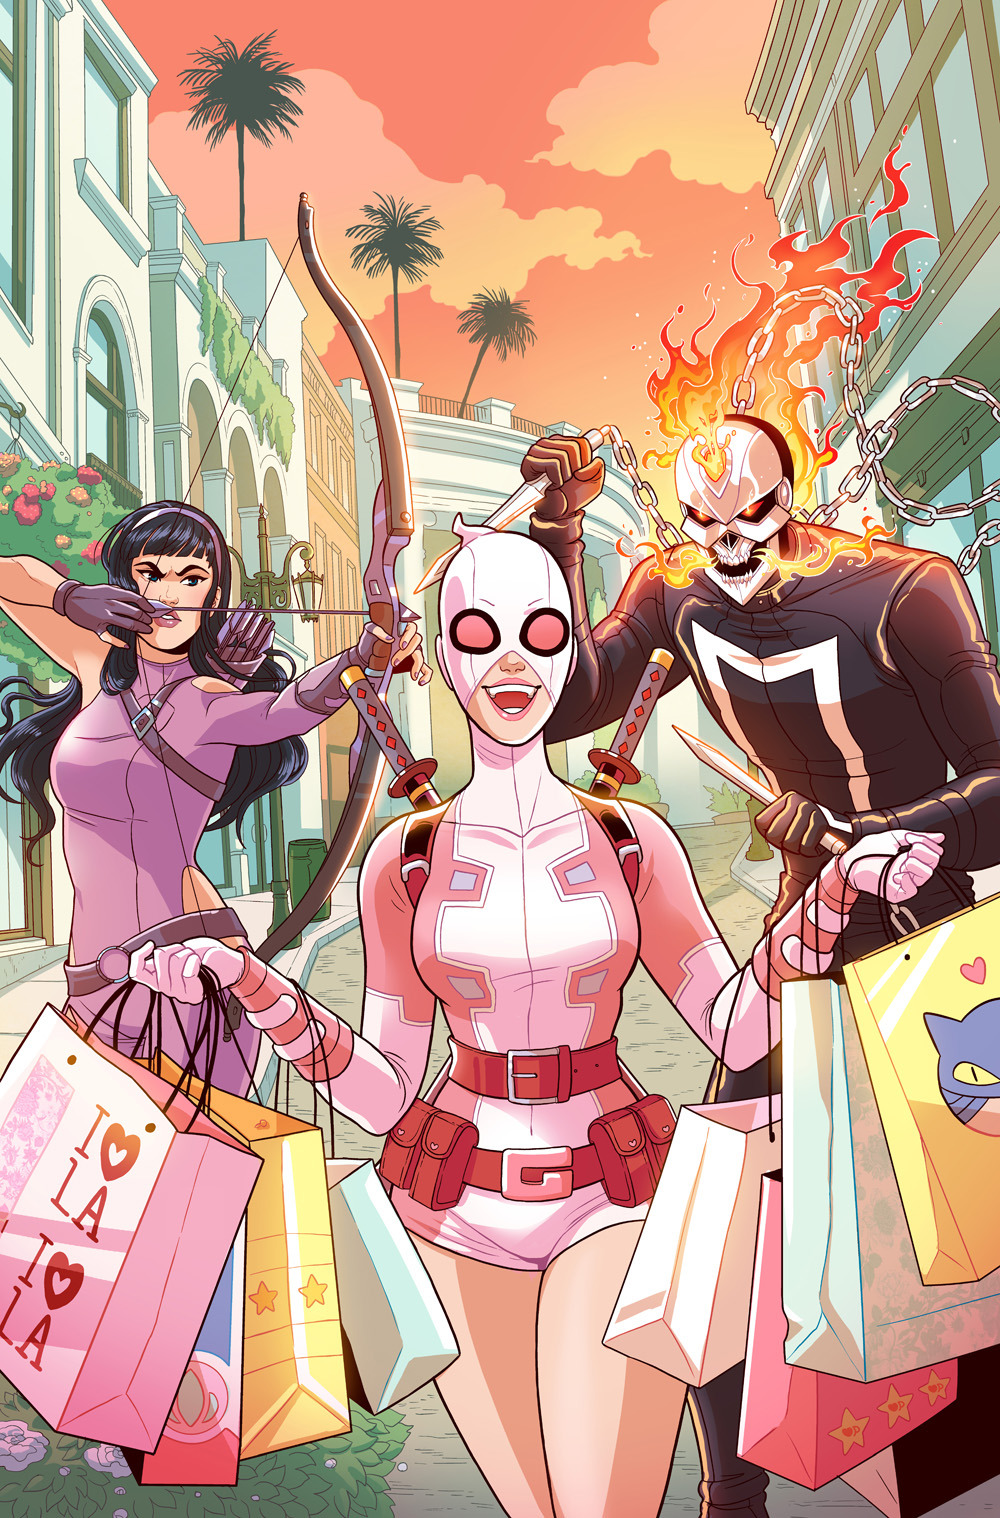  Gwenpool Issue #14 cover- Marvel 